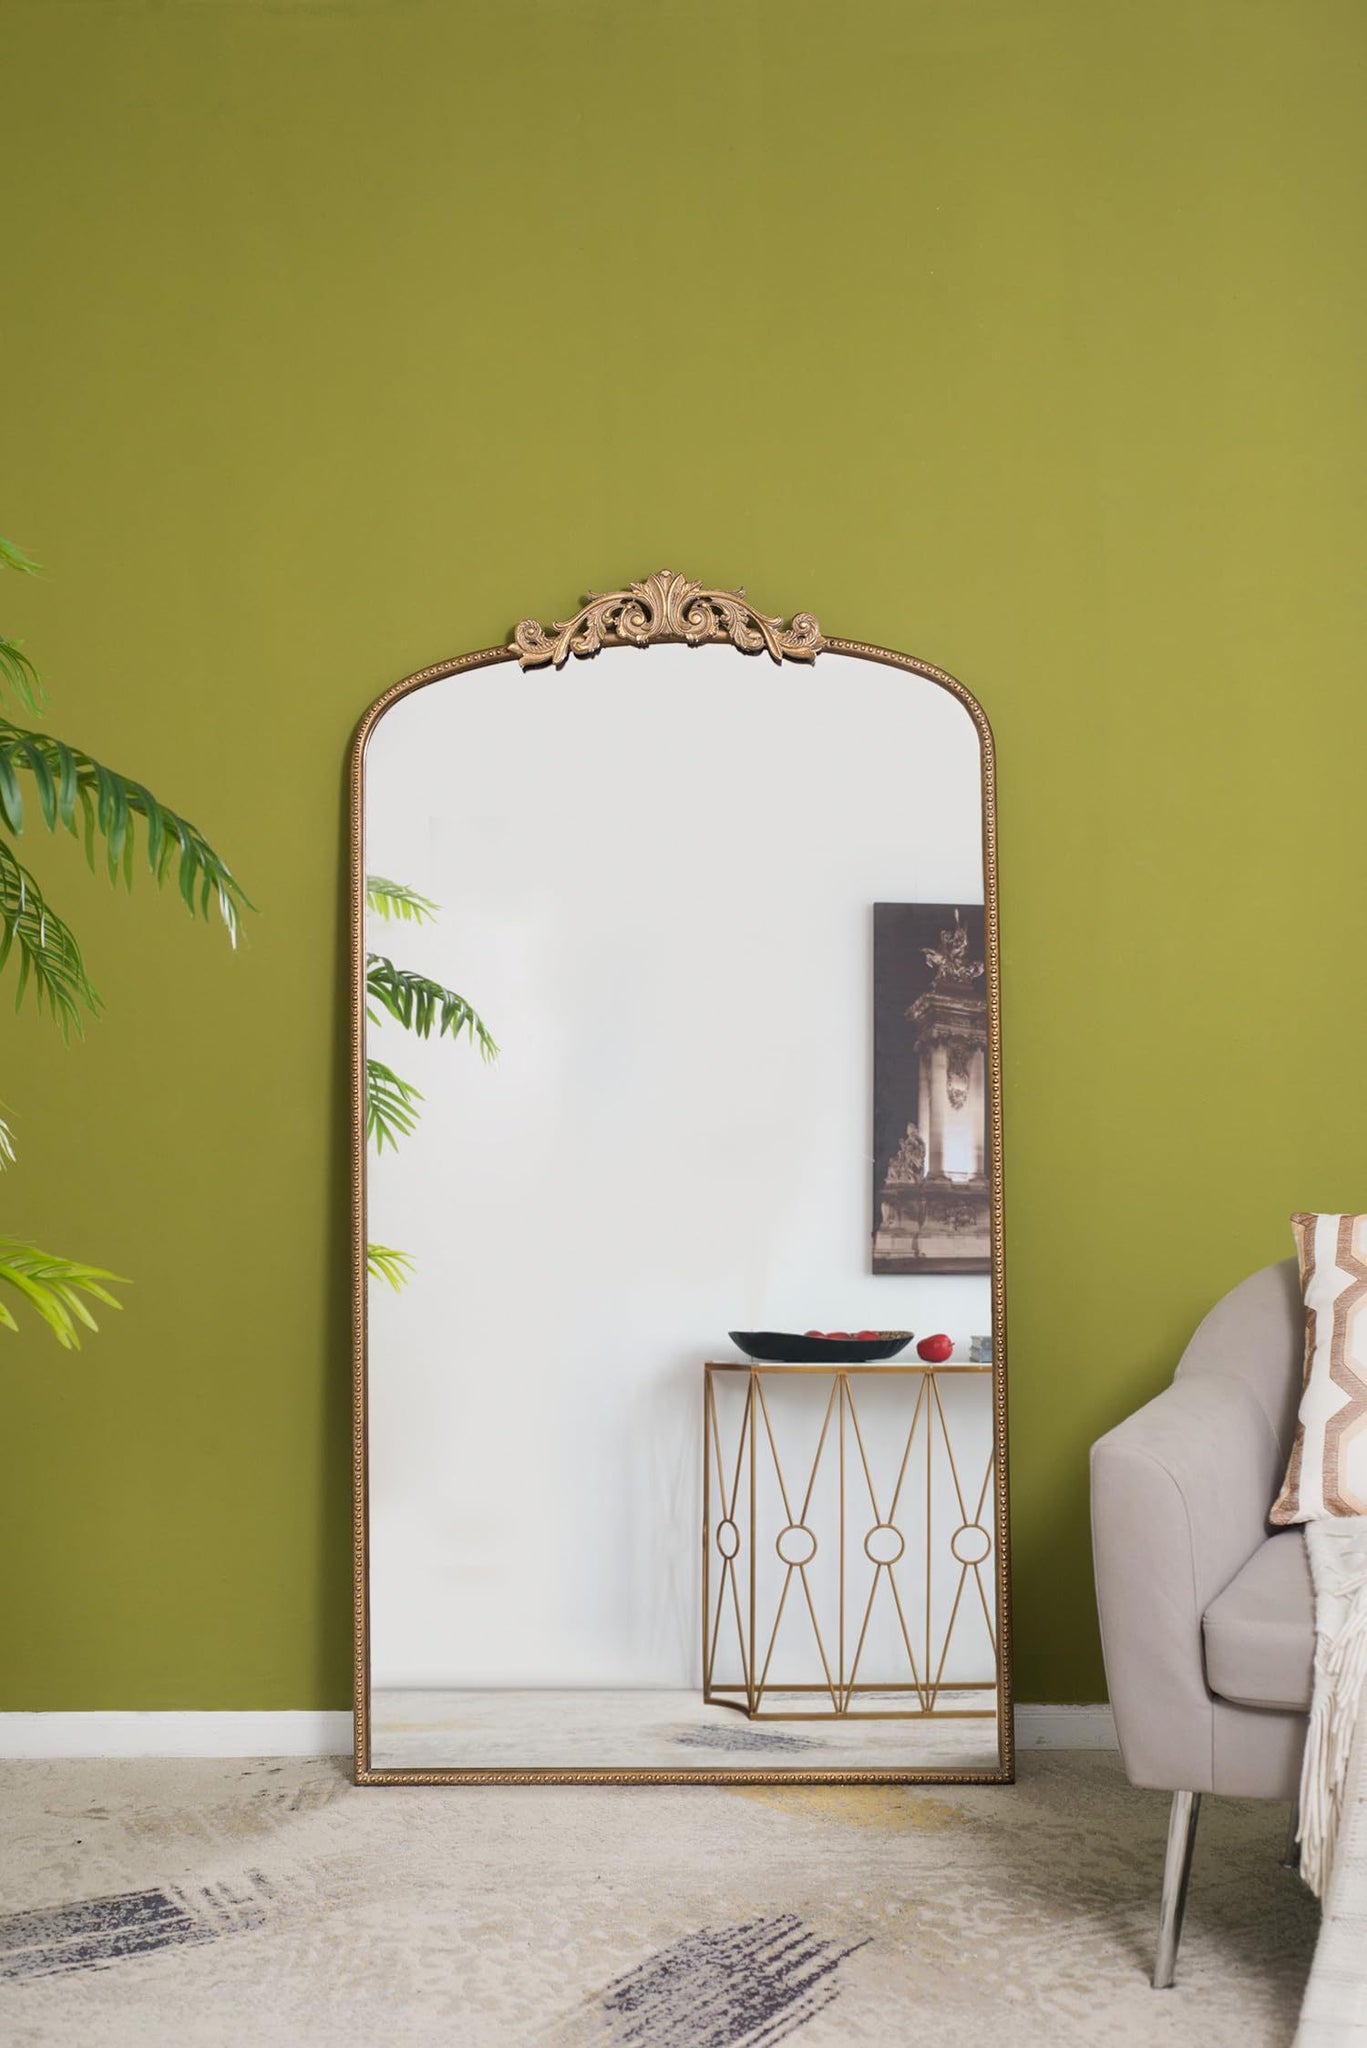 66" x 36" Full Length Mirror, Arched Mirror Hanging or gold-mdf+glass